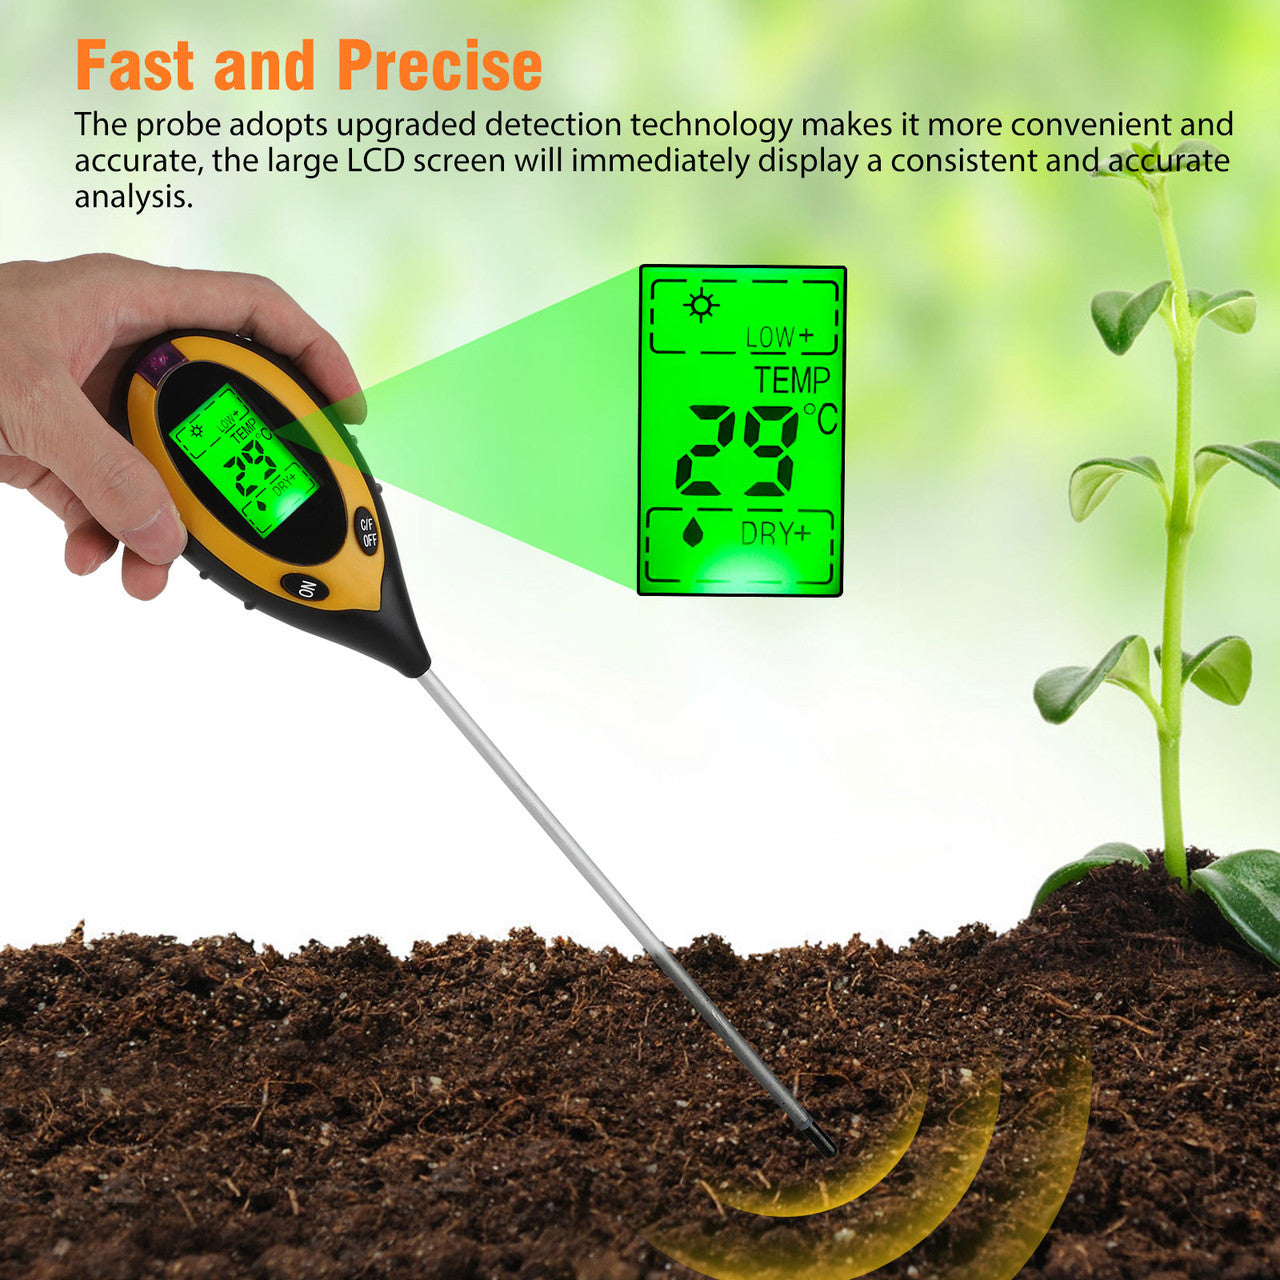 4 in 1 Soil Moisture Sensor Meter Tester, LCD Soil Water Monitor, Soil PH/Humidity/Temperature/Light Tester Hygrometer Great for Garden, Farm, Lawn, Plant Indoor & Outdoor Care Tool, Battery Included